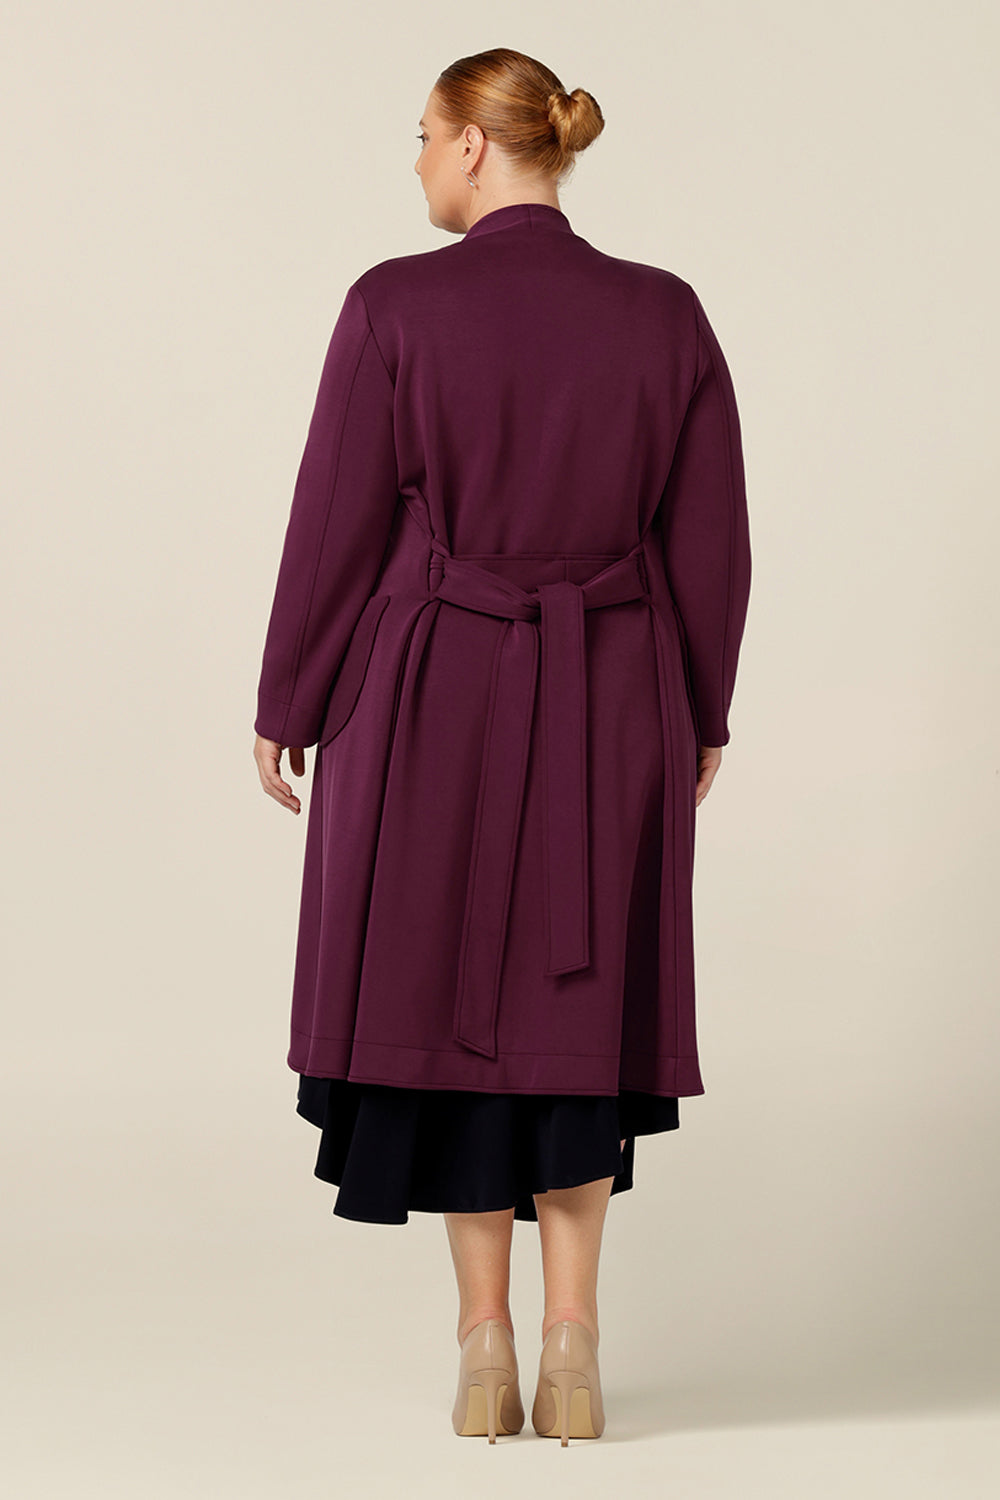 Back view of Australia and New Zealand women's clothing label, L&Fs best lightweight coat for winter. In wine red Modal, this women's coat has stretch for comfortable wear over workwear and corporate suiting, making it a great coat for travelling that work day commute.